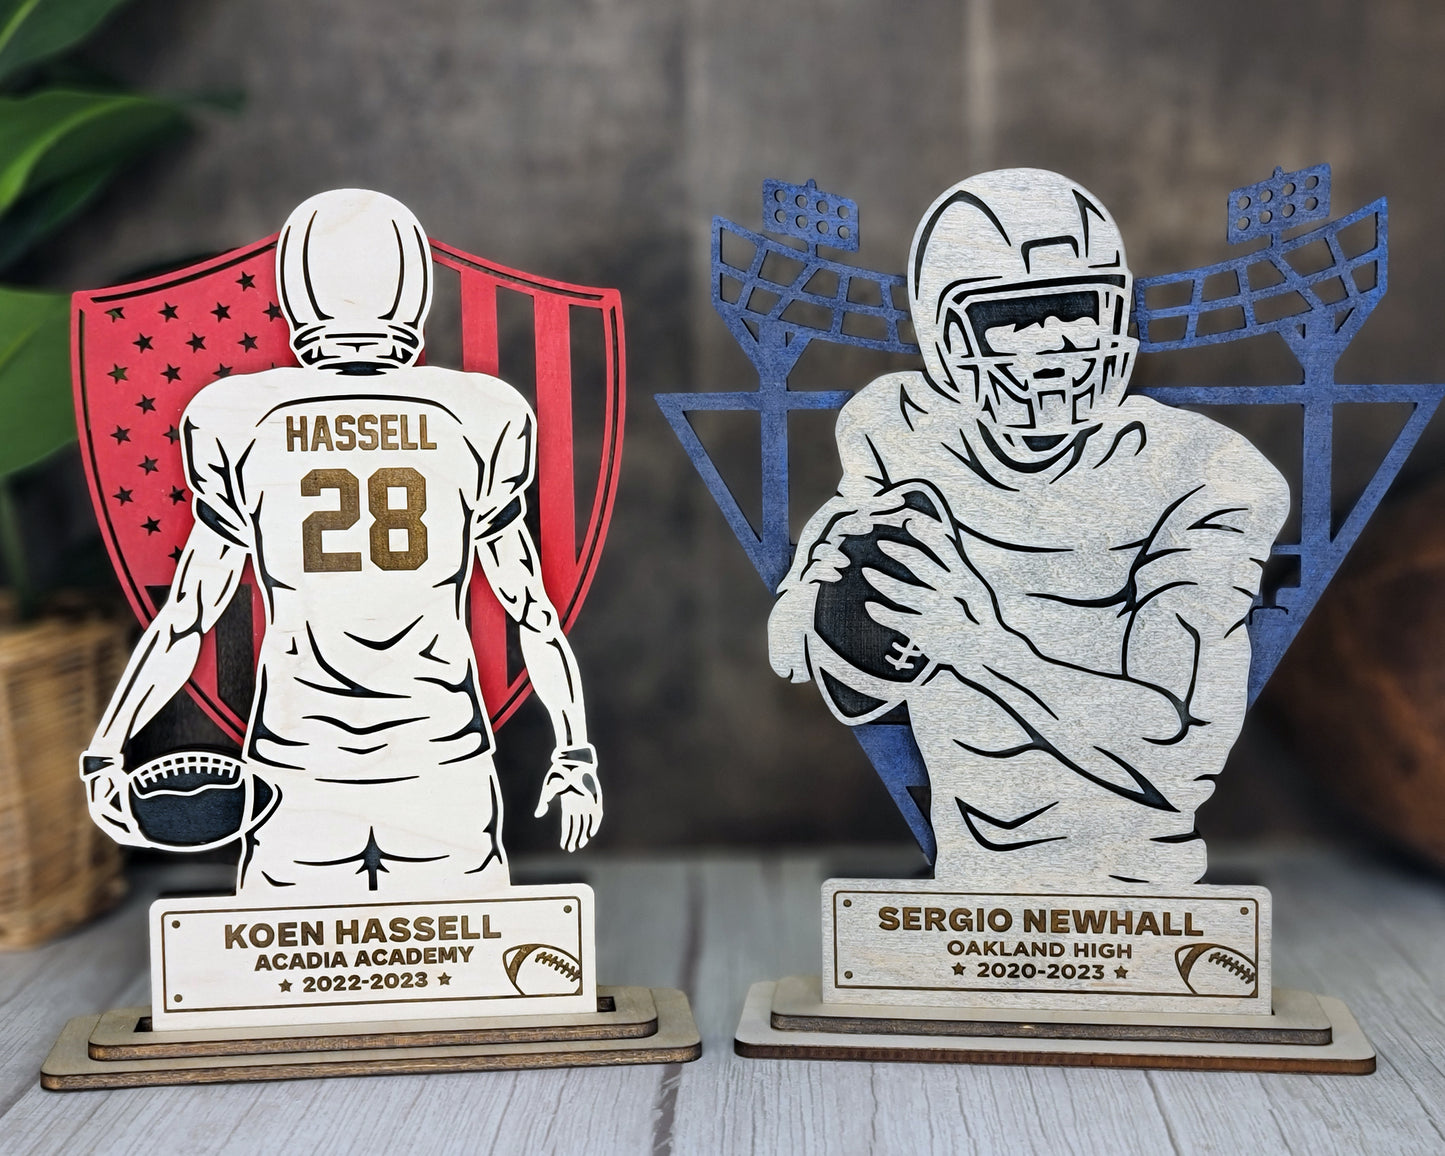 Stadium Series Stand Ups - Football - 5 poses in 2 cut formats and 1 engrave option included - Tested on Glowforge & Lightburn